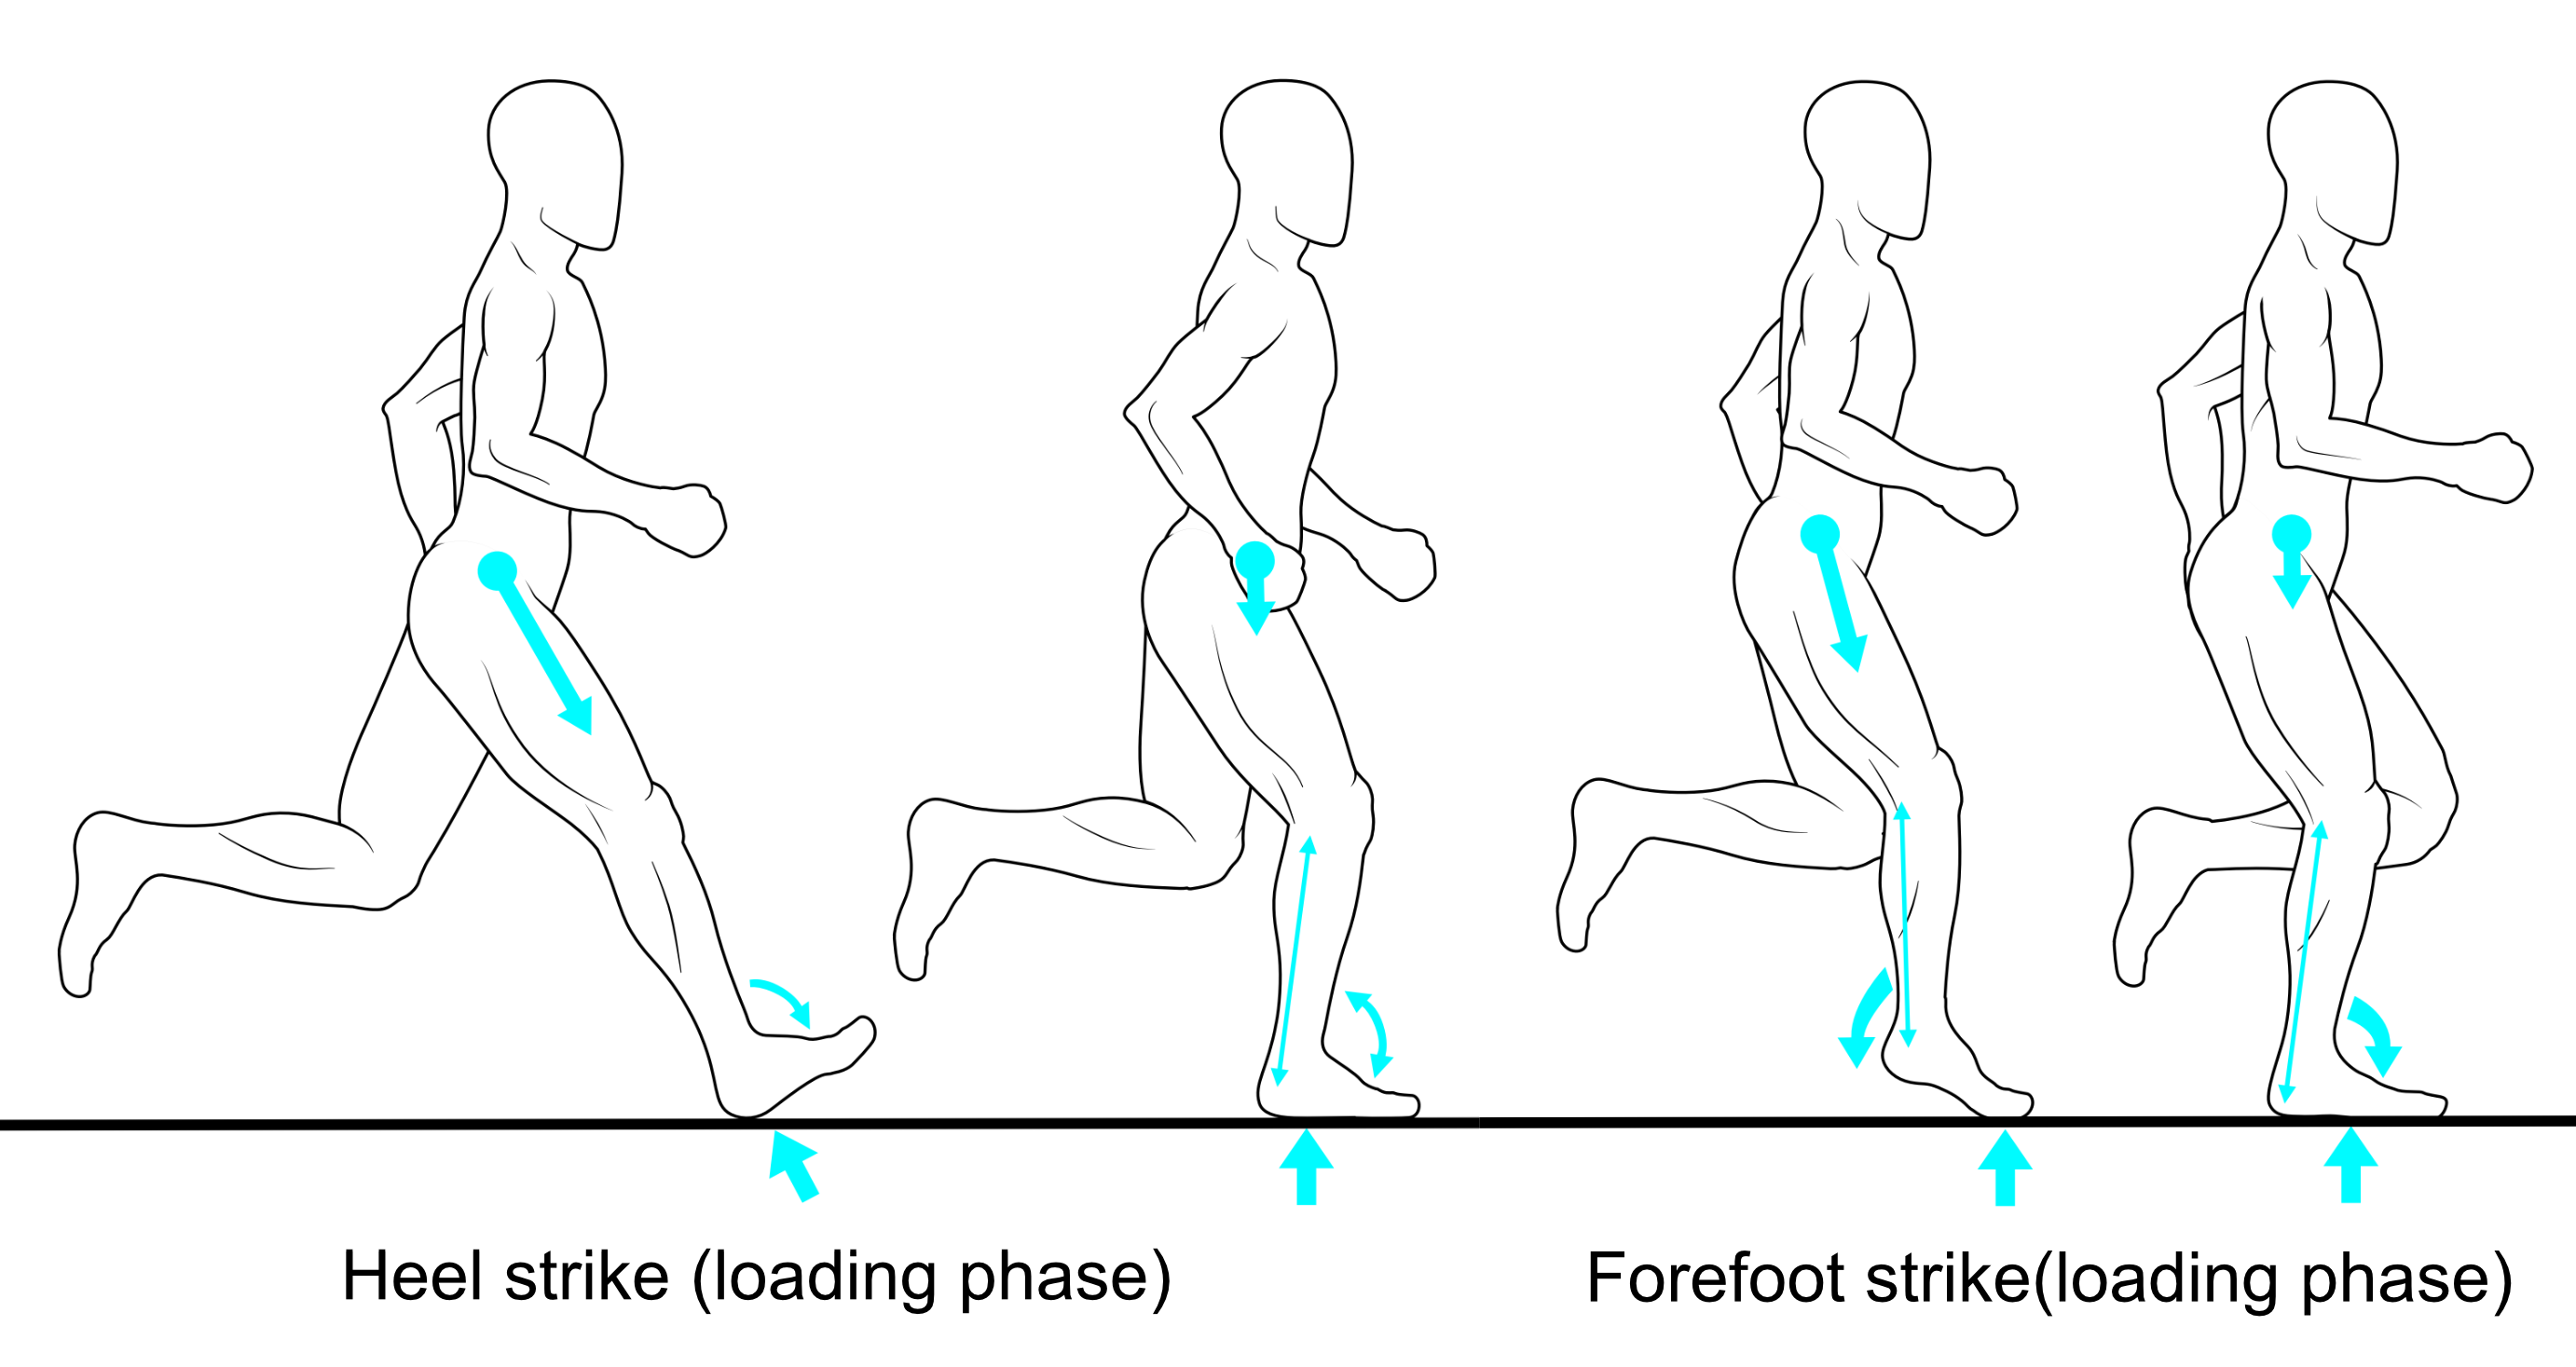 I. Introduction to Foot Strike in Running